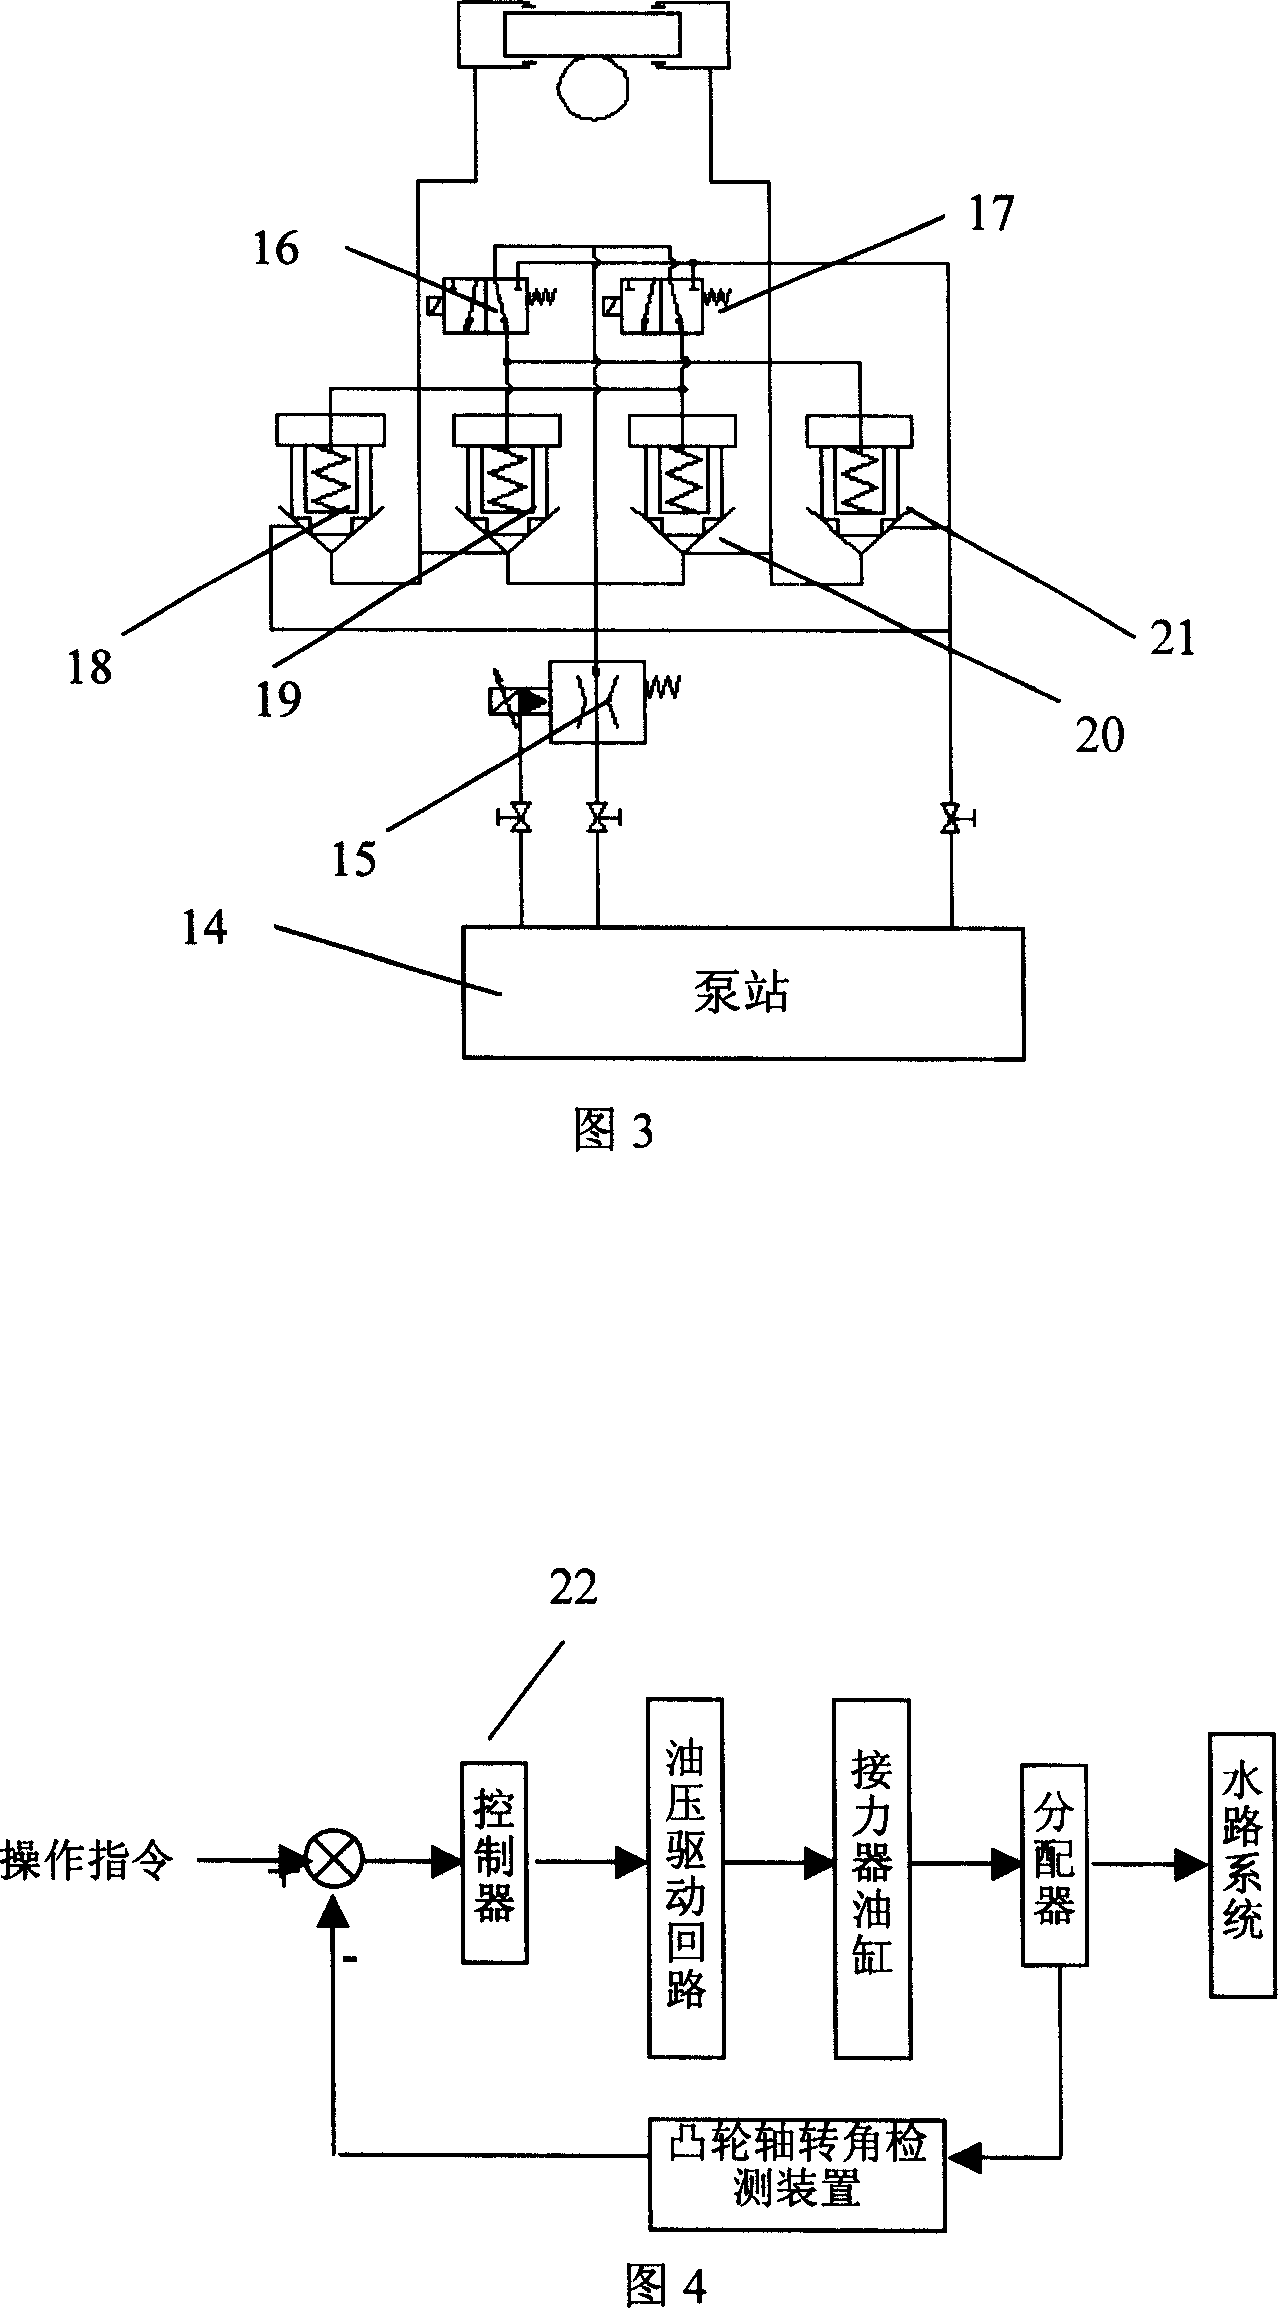 Controlling system of moulded forging hydraulic press with proportional type oil controlling water